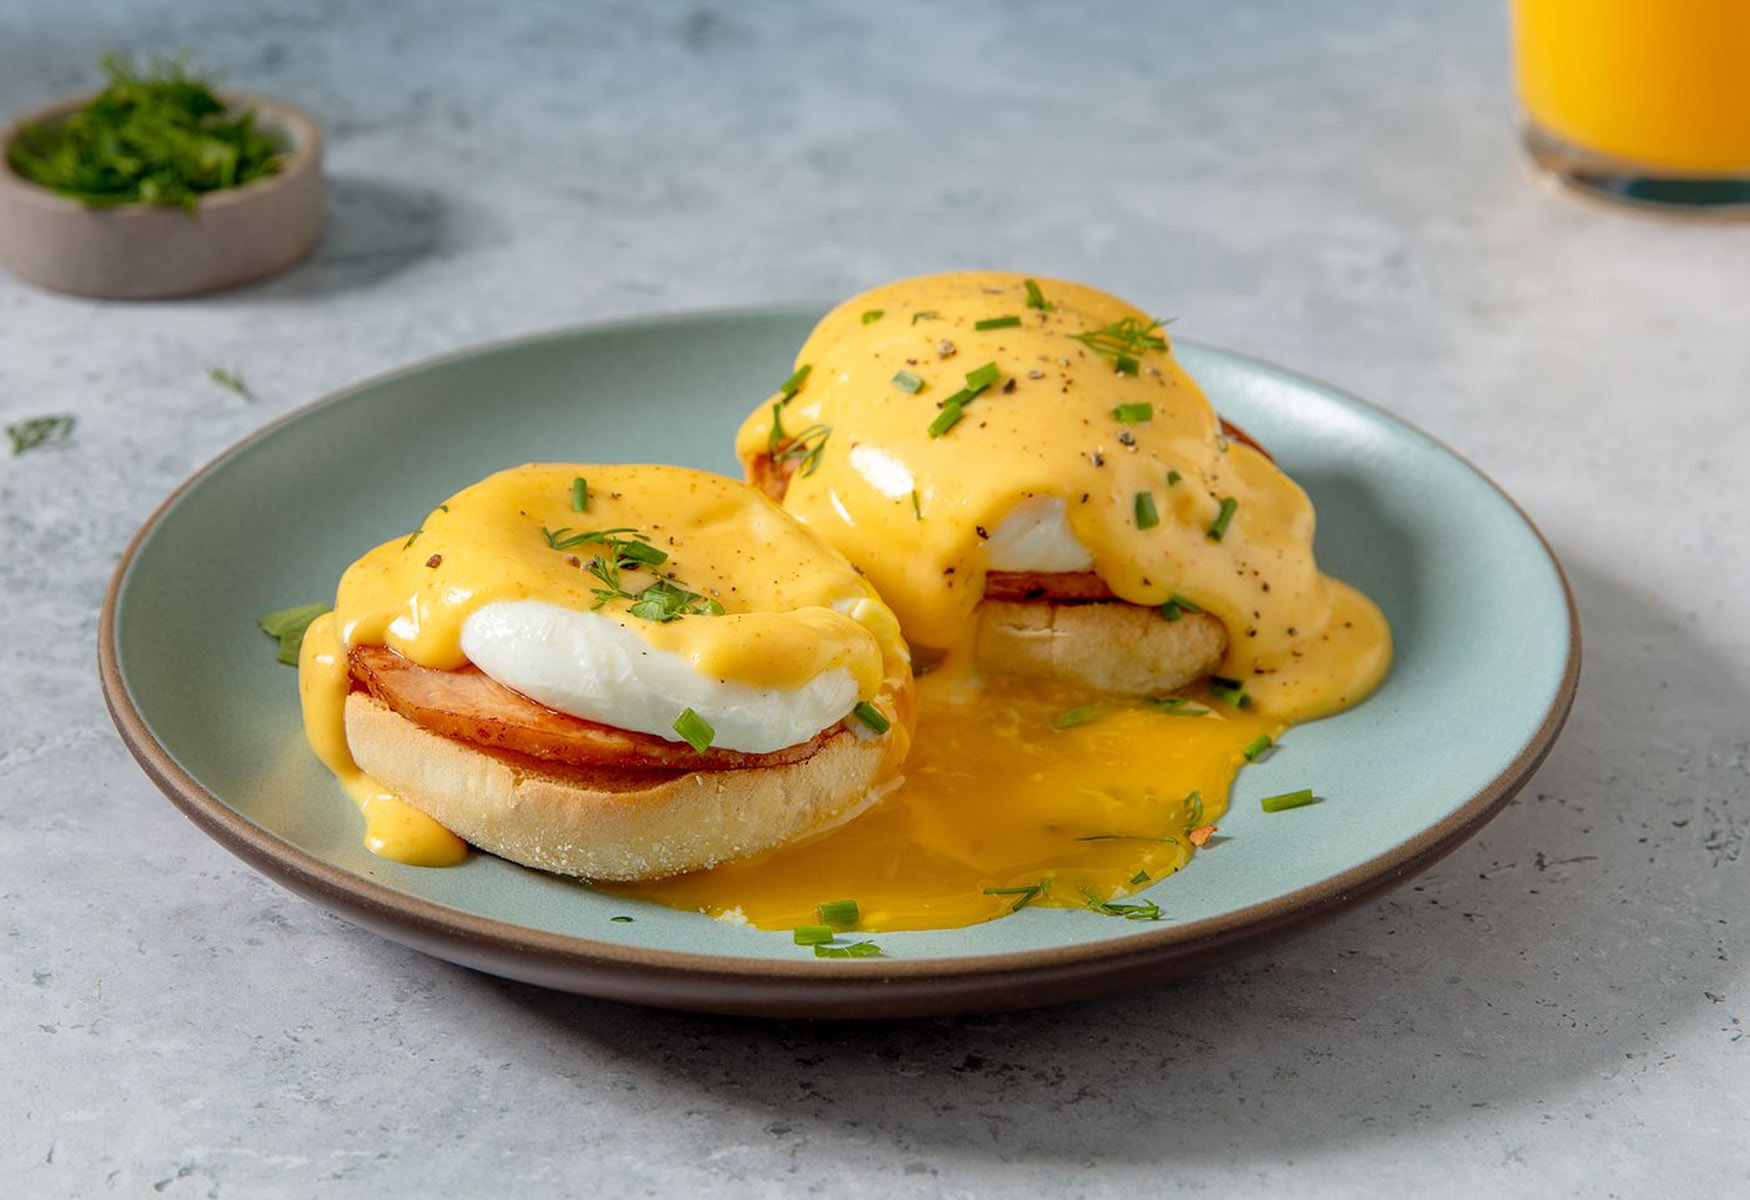 20-eggs-benedict-nutrition-facts